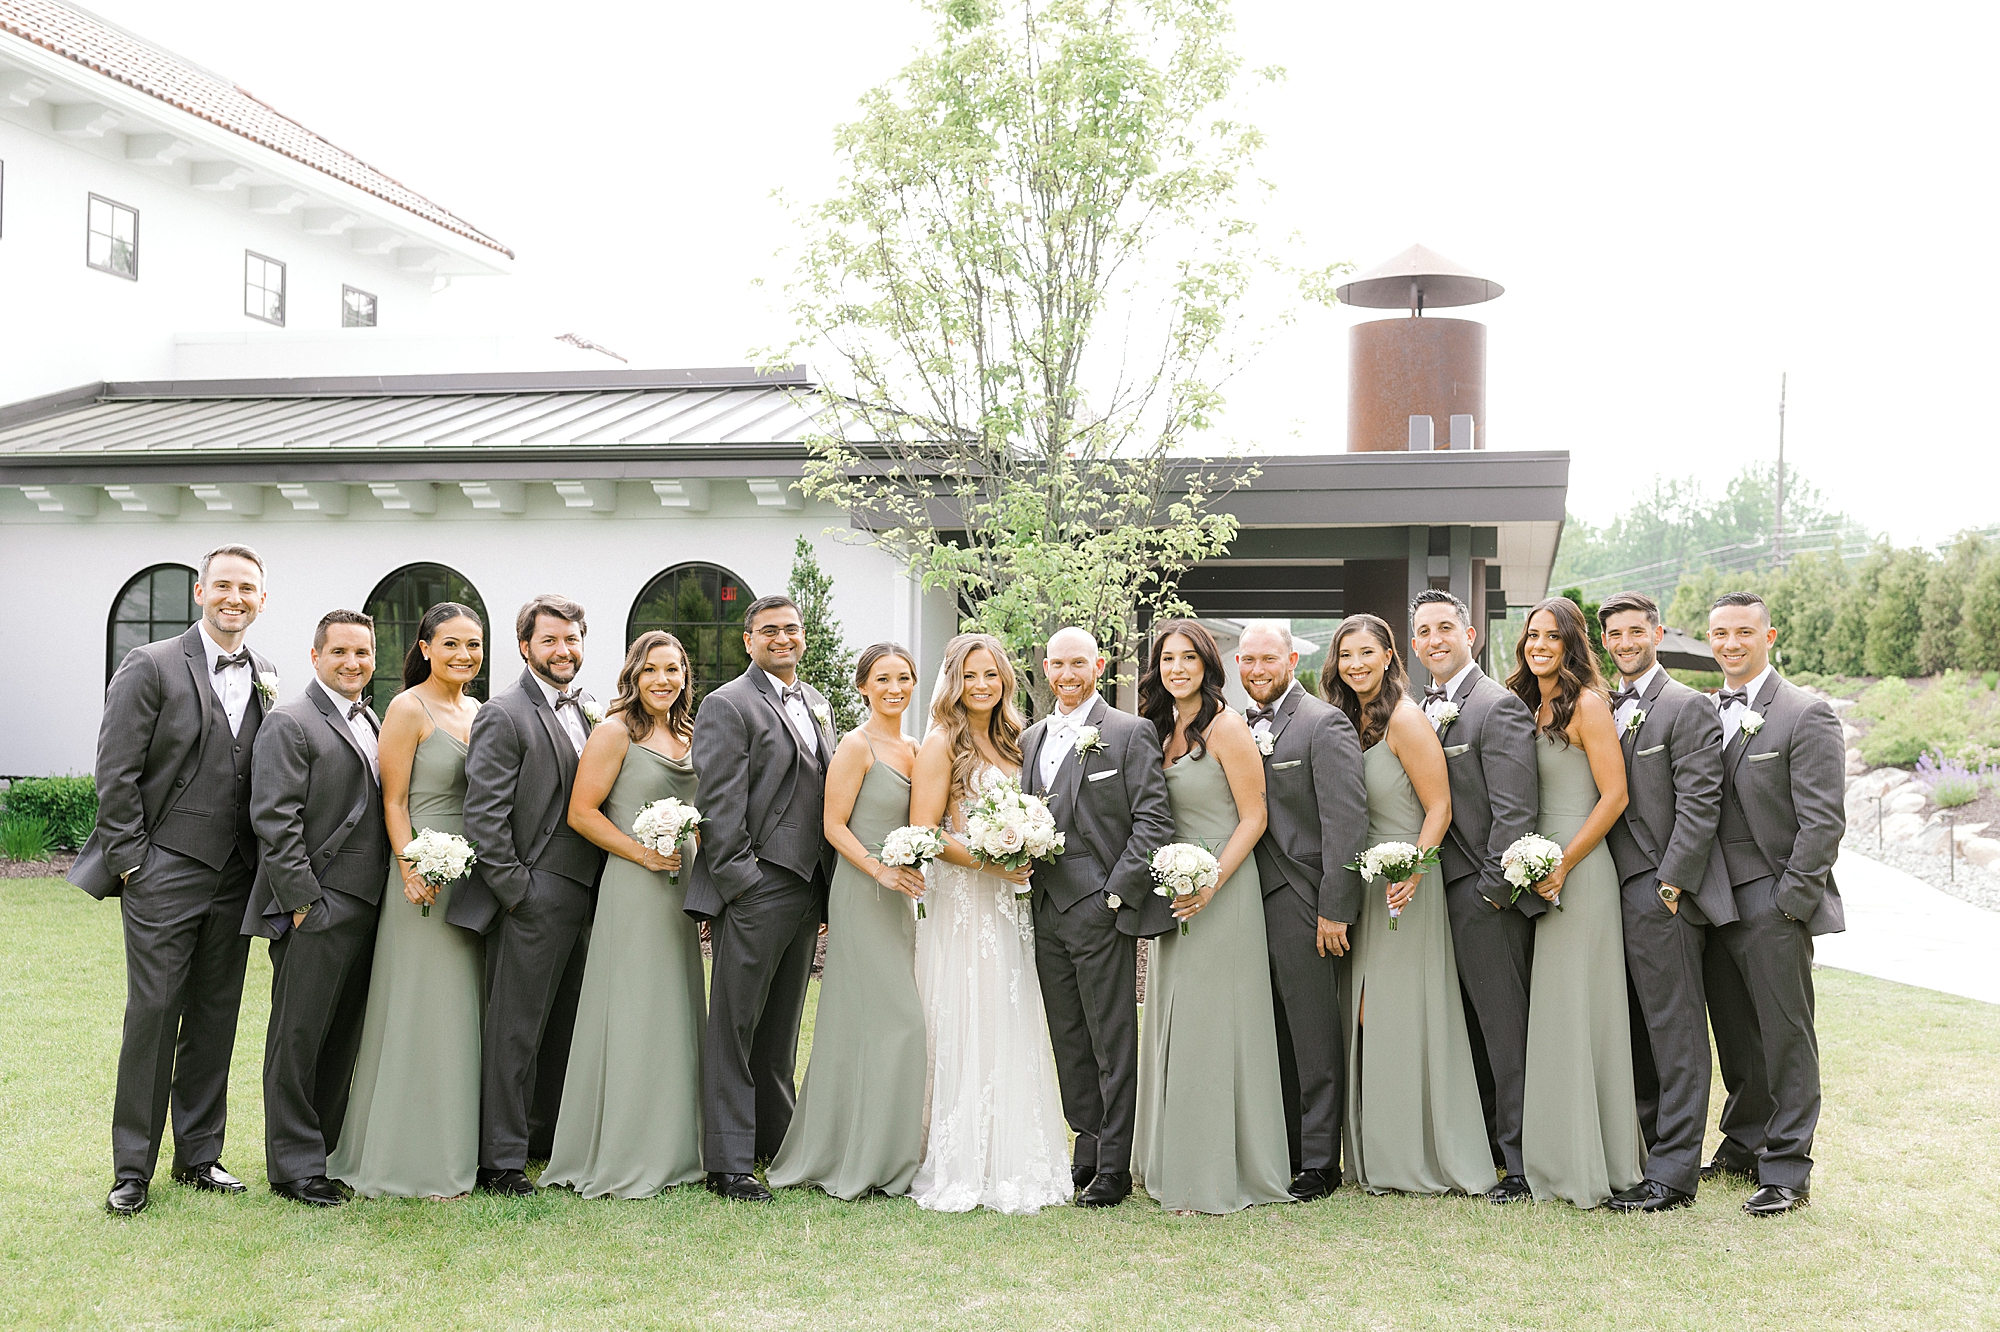 groom and bride pose with wedding party in sage green gowns and grey suits